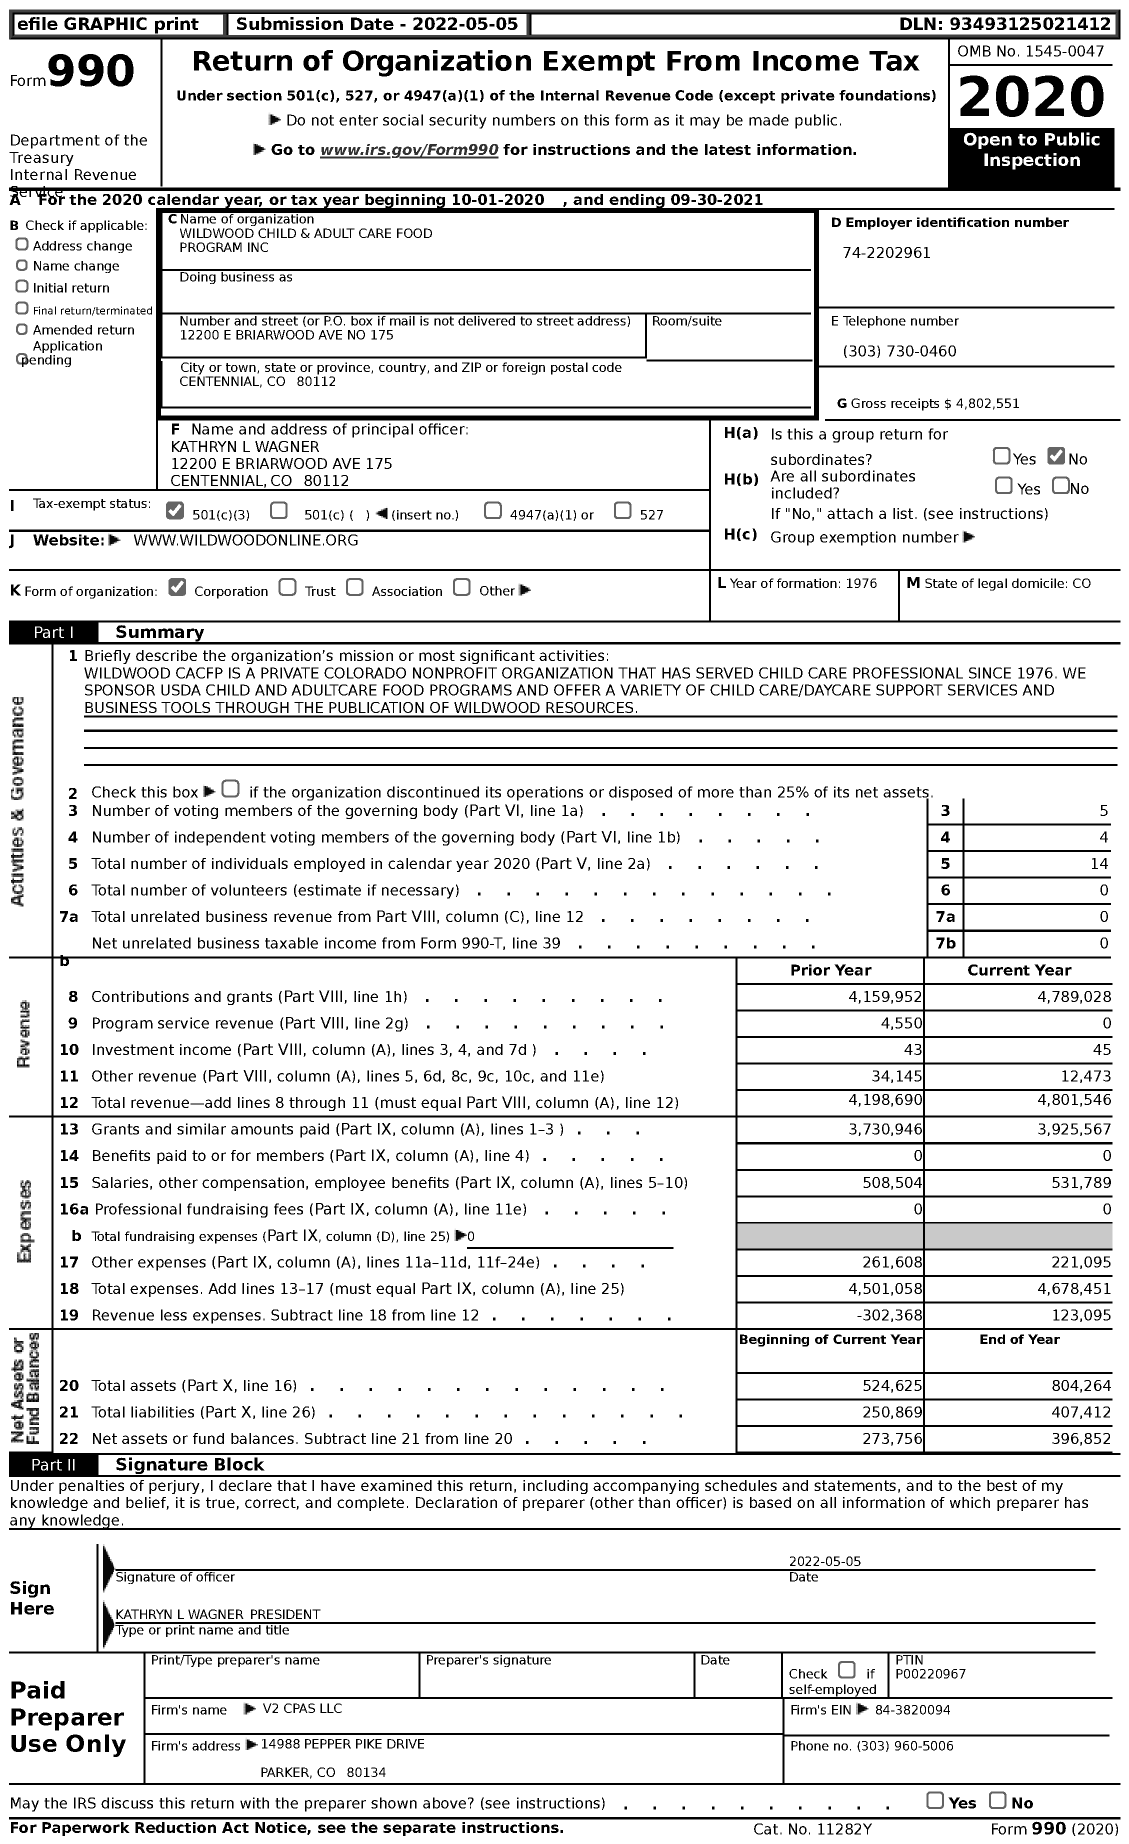 Image of first page of 2020 Form 990 for Wildwood Child and Adult Care Food Program